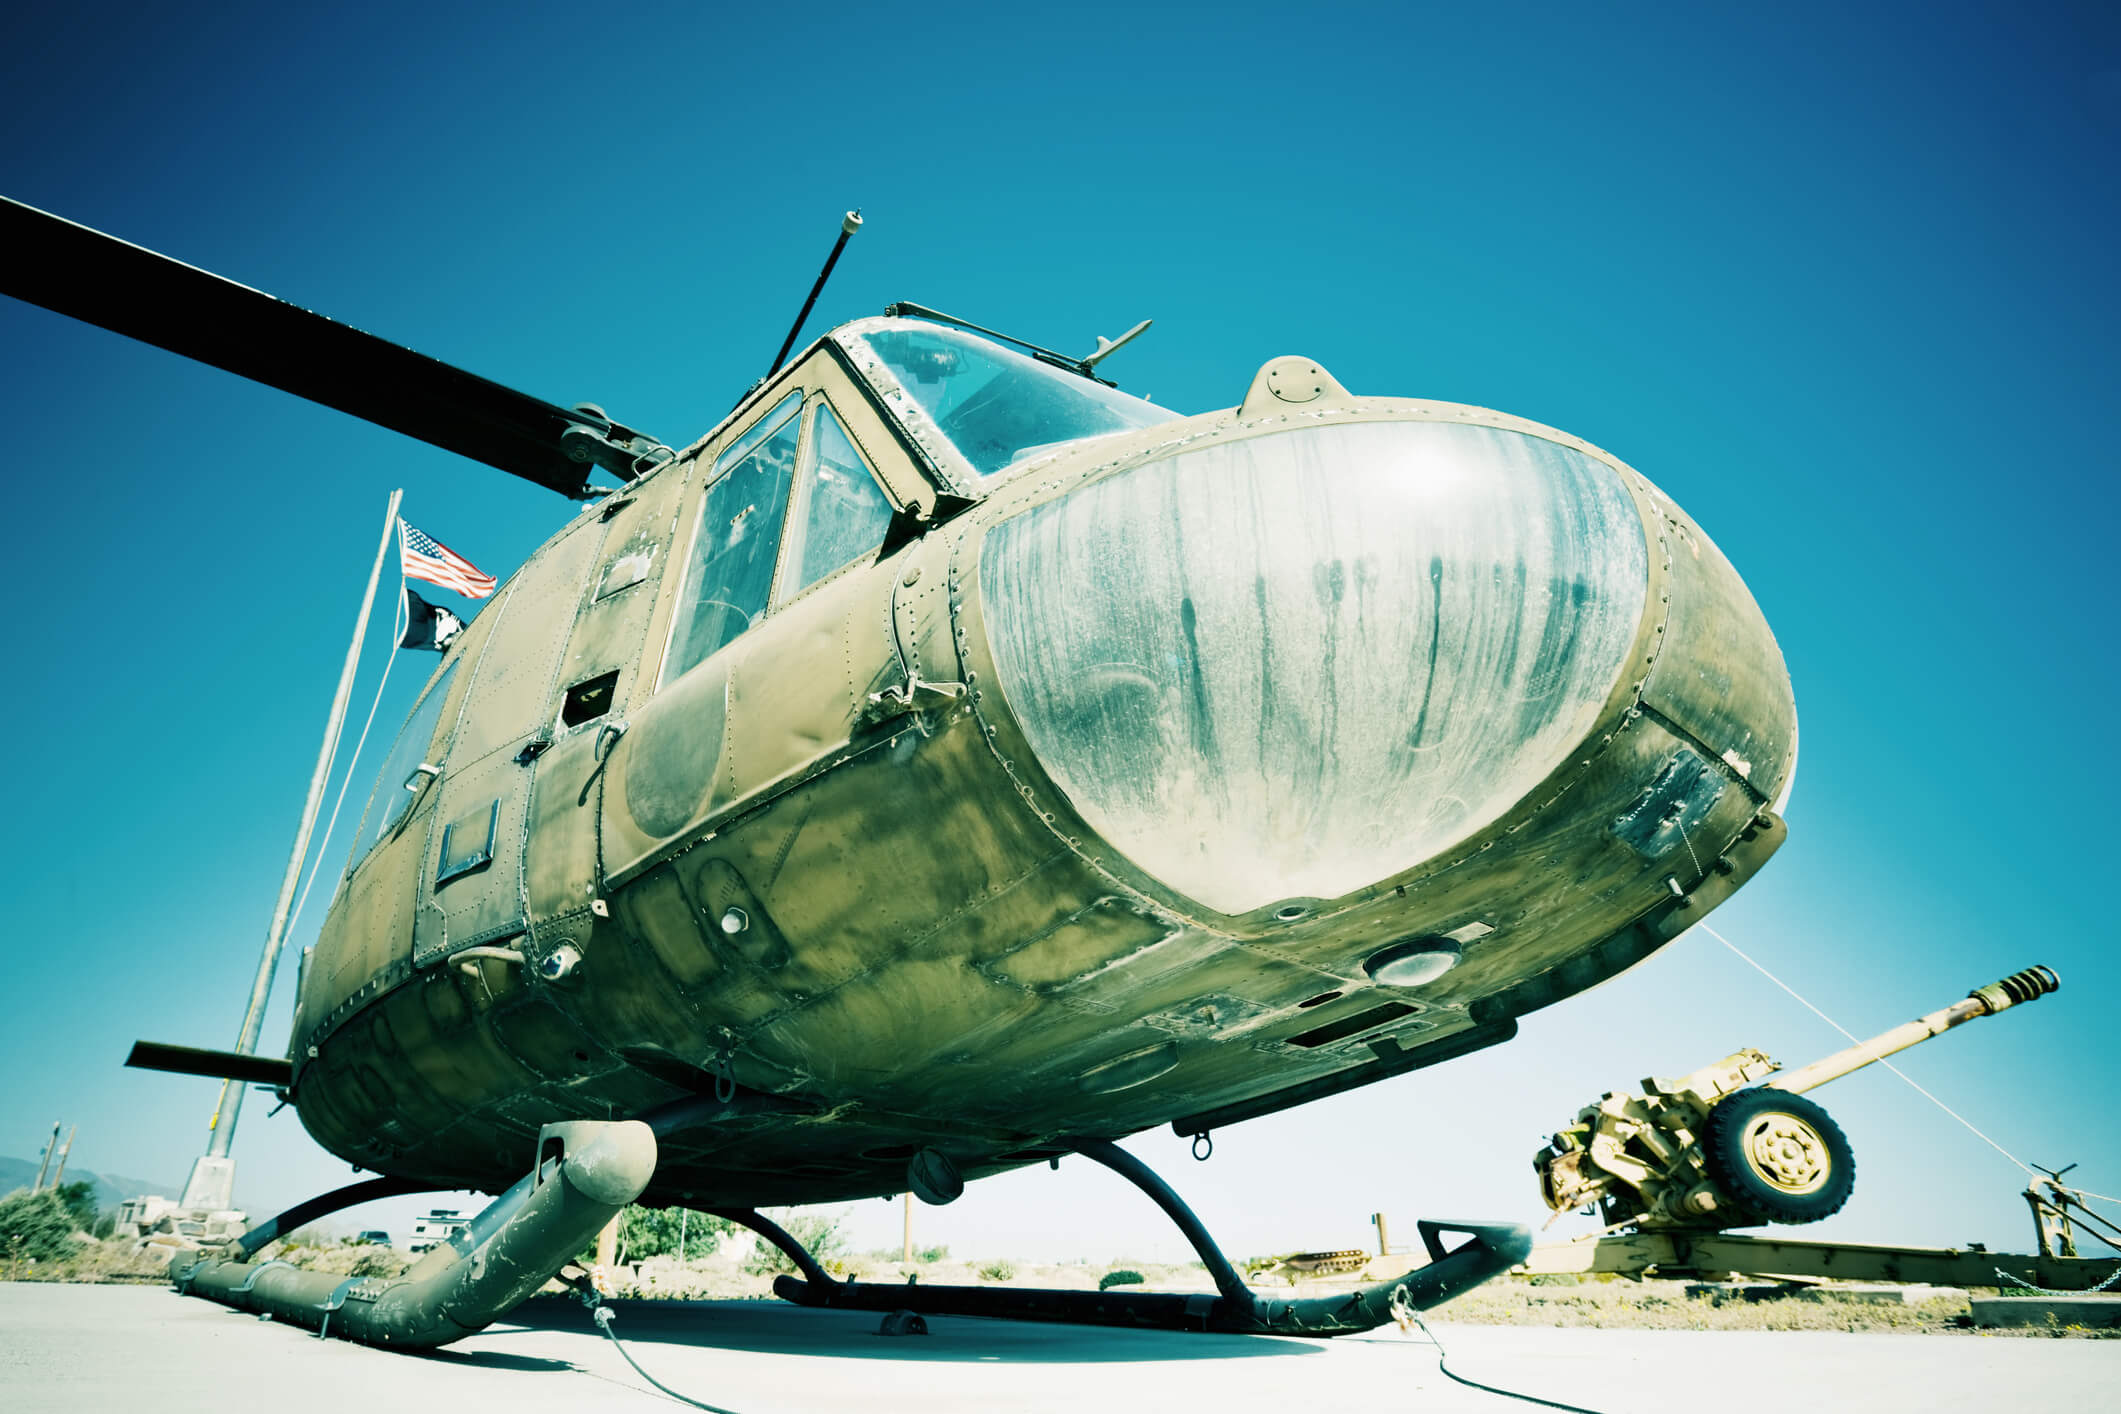 Helicopter History, Part 2: A History of Helicopters in the Military